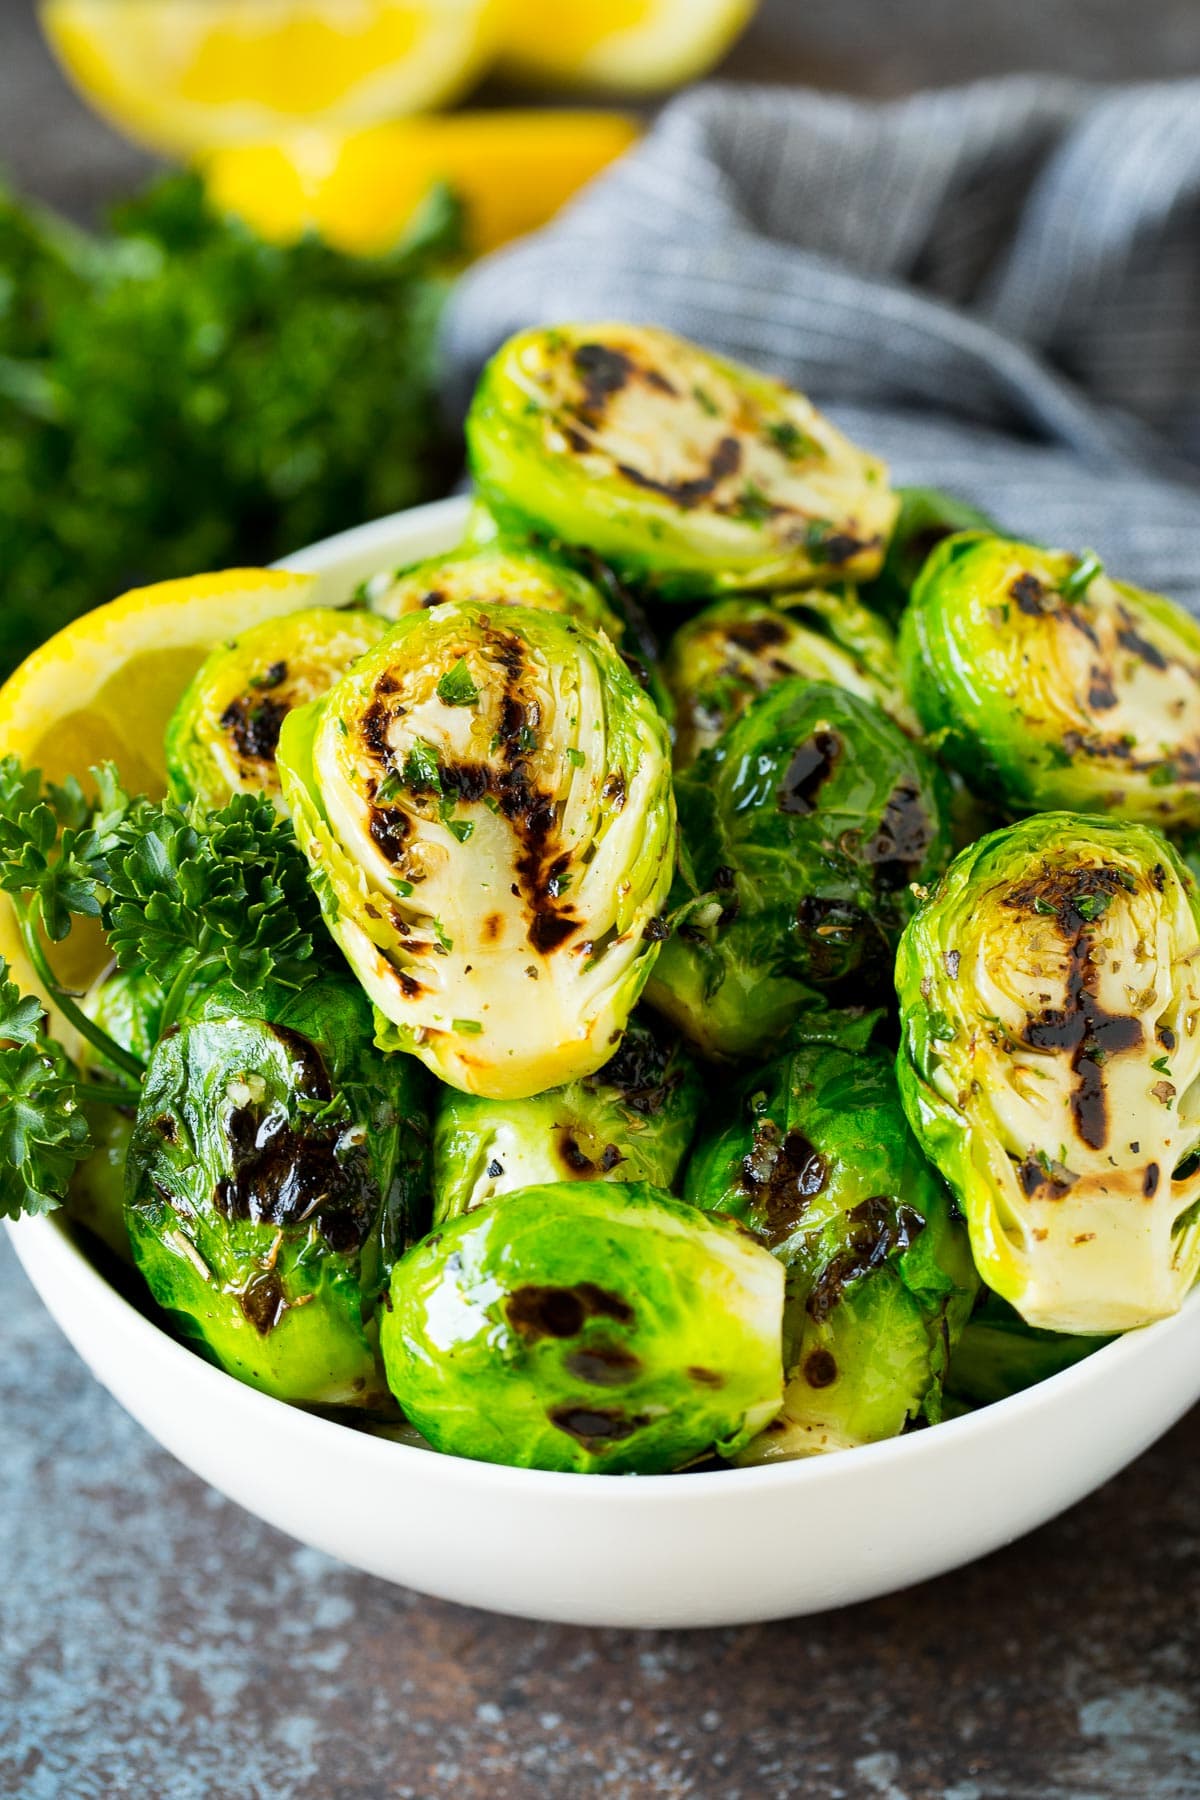 A bowl of grilled brussels sprouts topped with parsley.